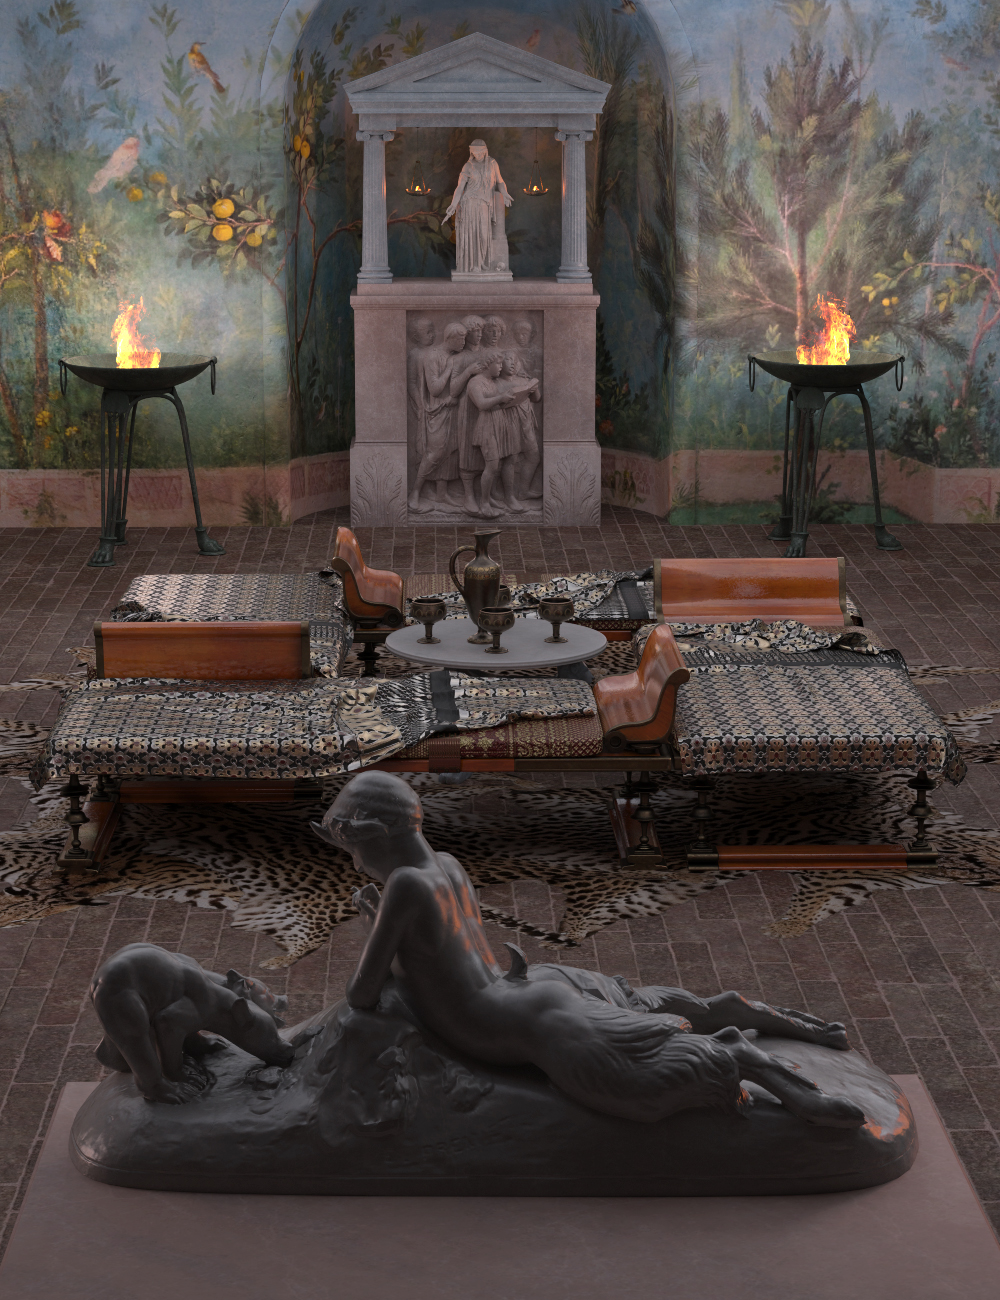 The Domus of Victory Bath and Triclinium by: Deepsea, 3D Models by Daz 3D